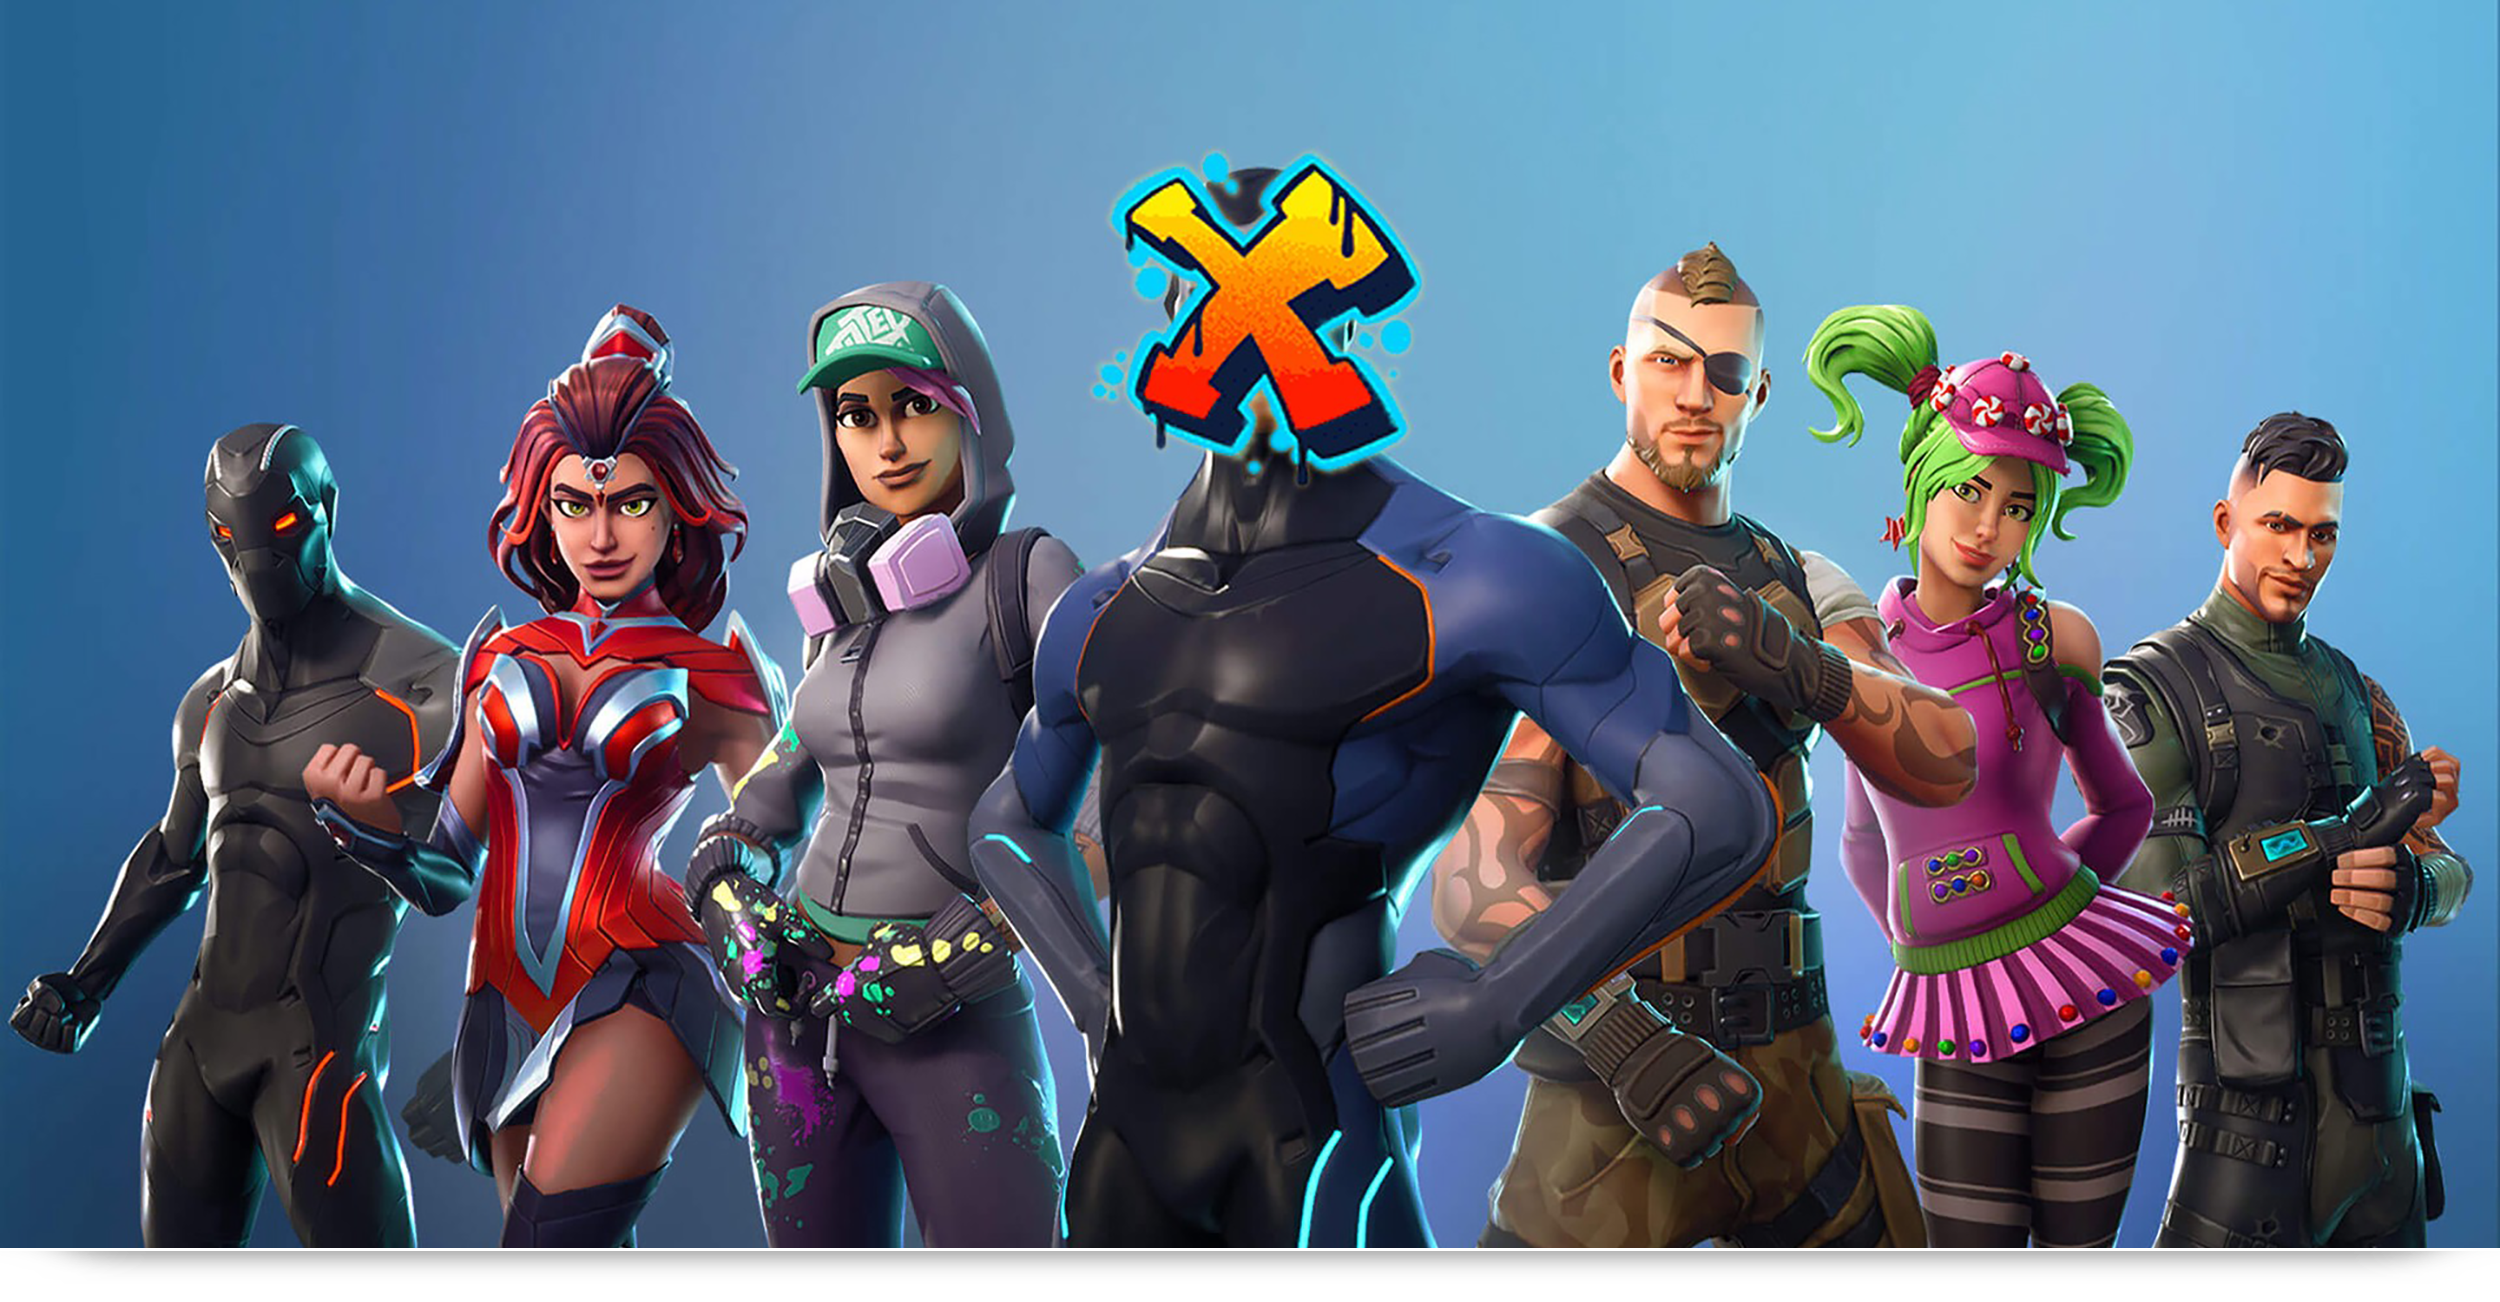 Full Crossplay Support Comes to PS4 Starting With 'Fortnite